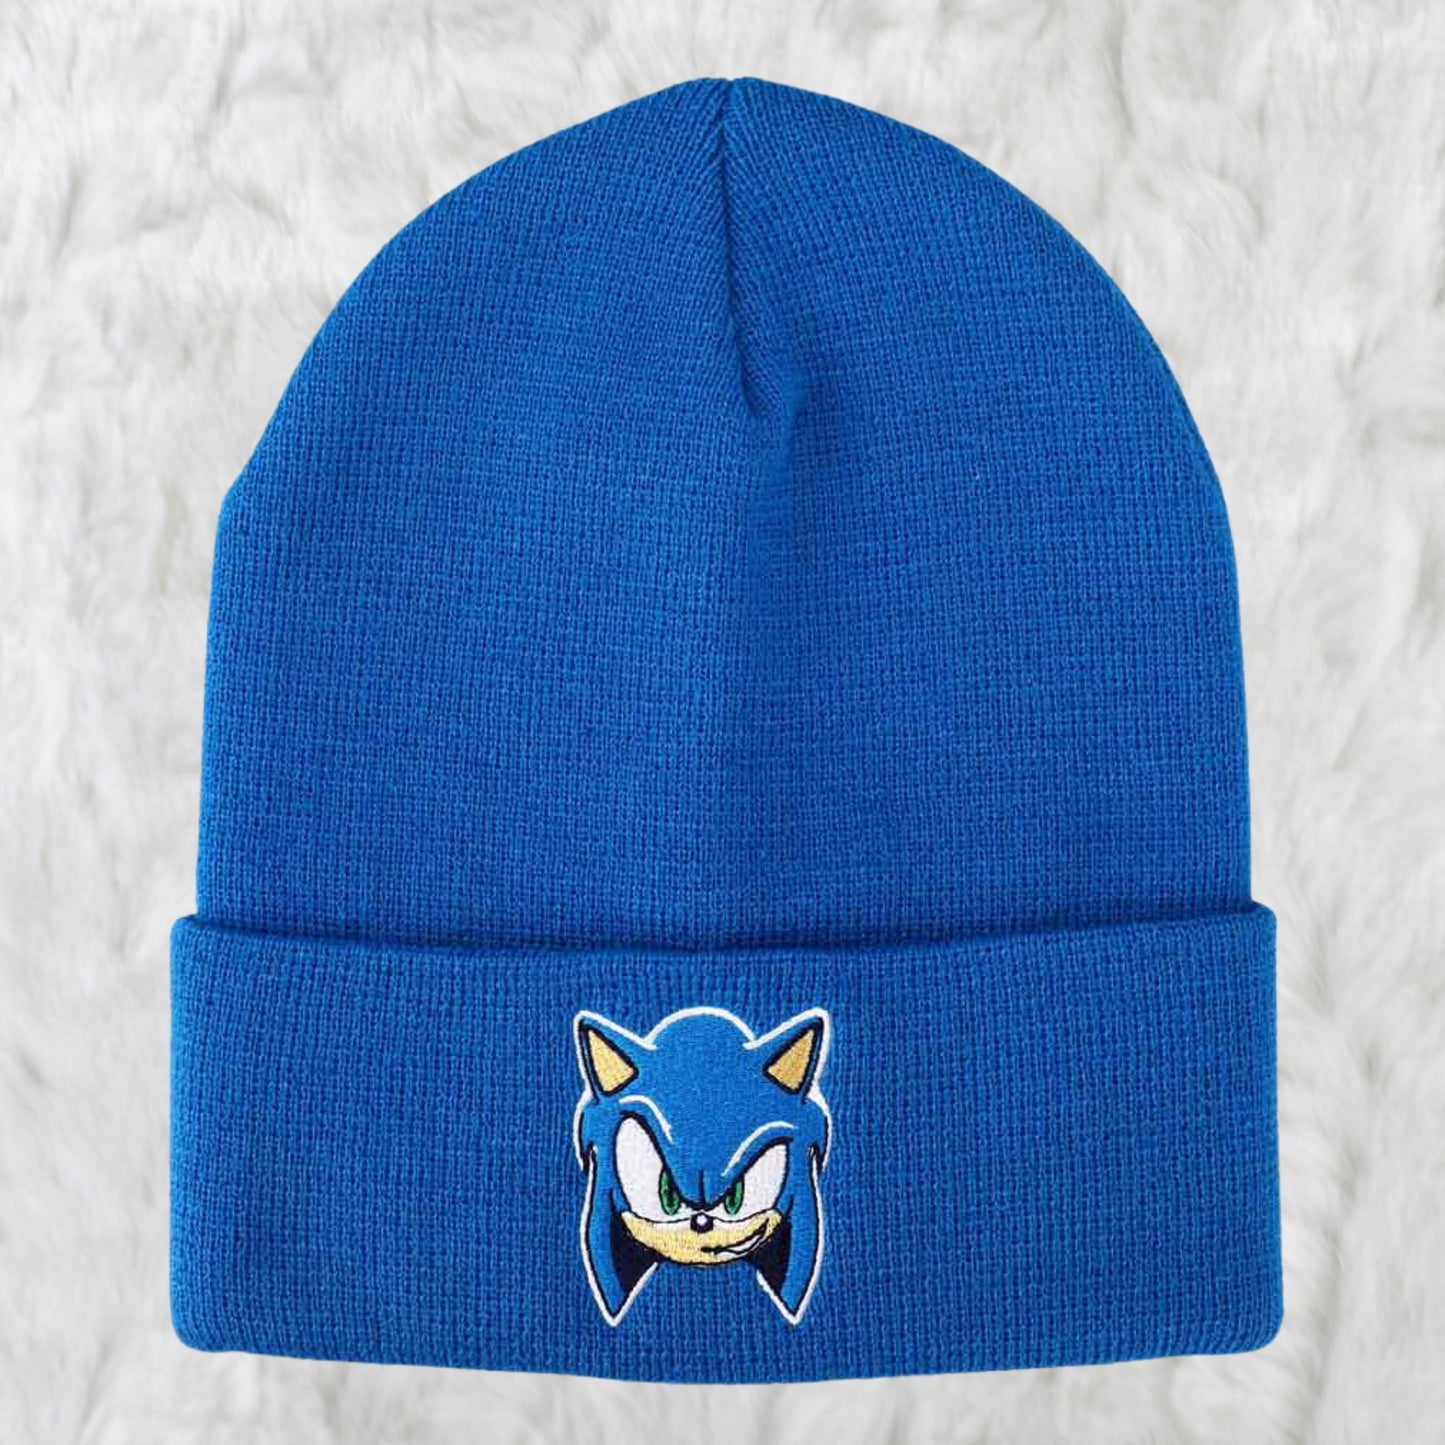 Sonic the Hedgehog Embroidered Beanie Hat